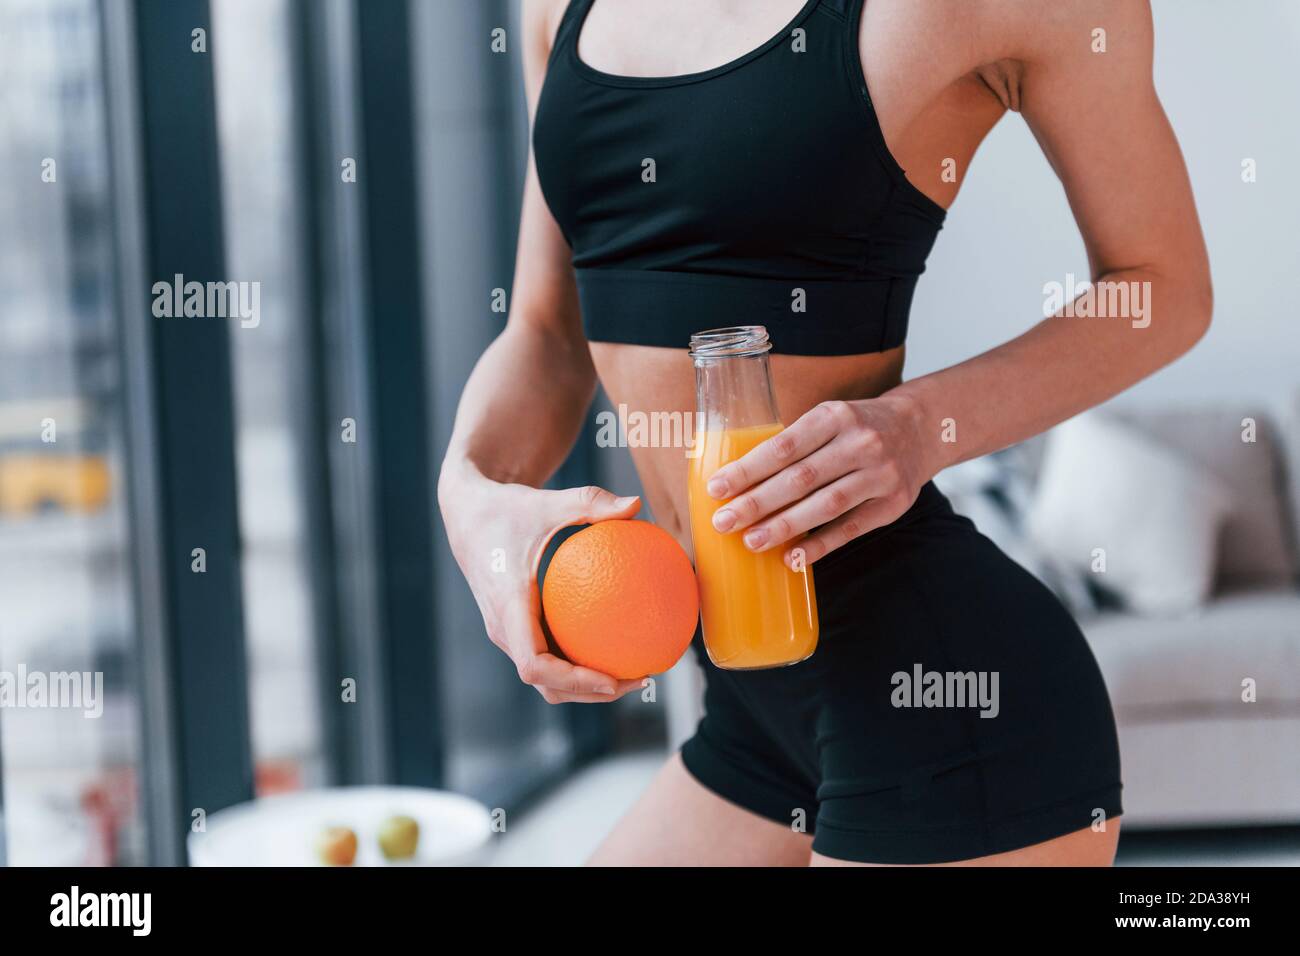 holds healthy food in hands. Young woman with slim body shape in black sportswear have fitness day indoors at home Stock Photo